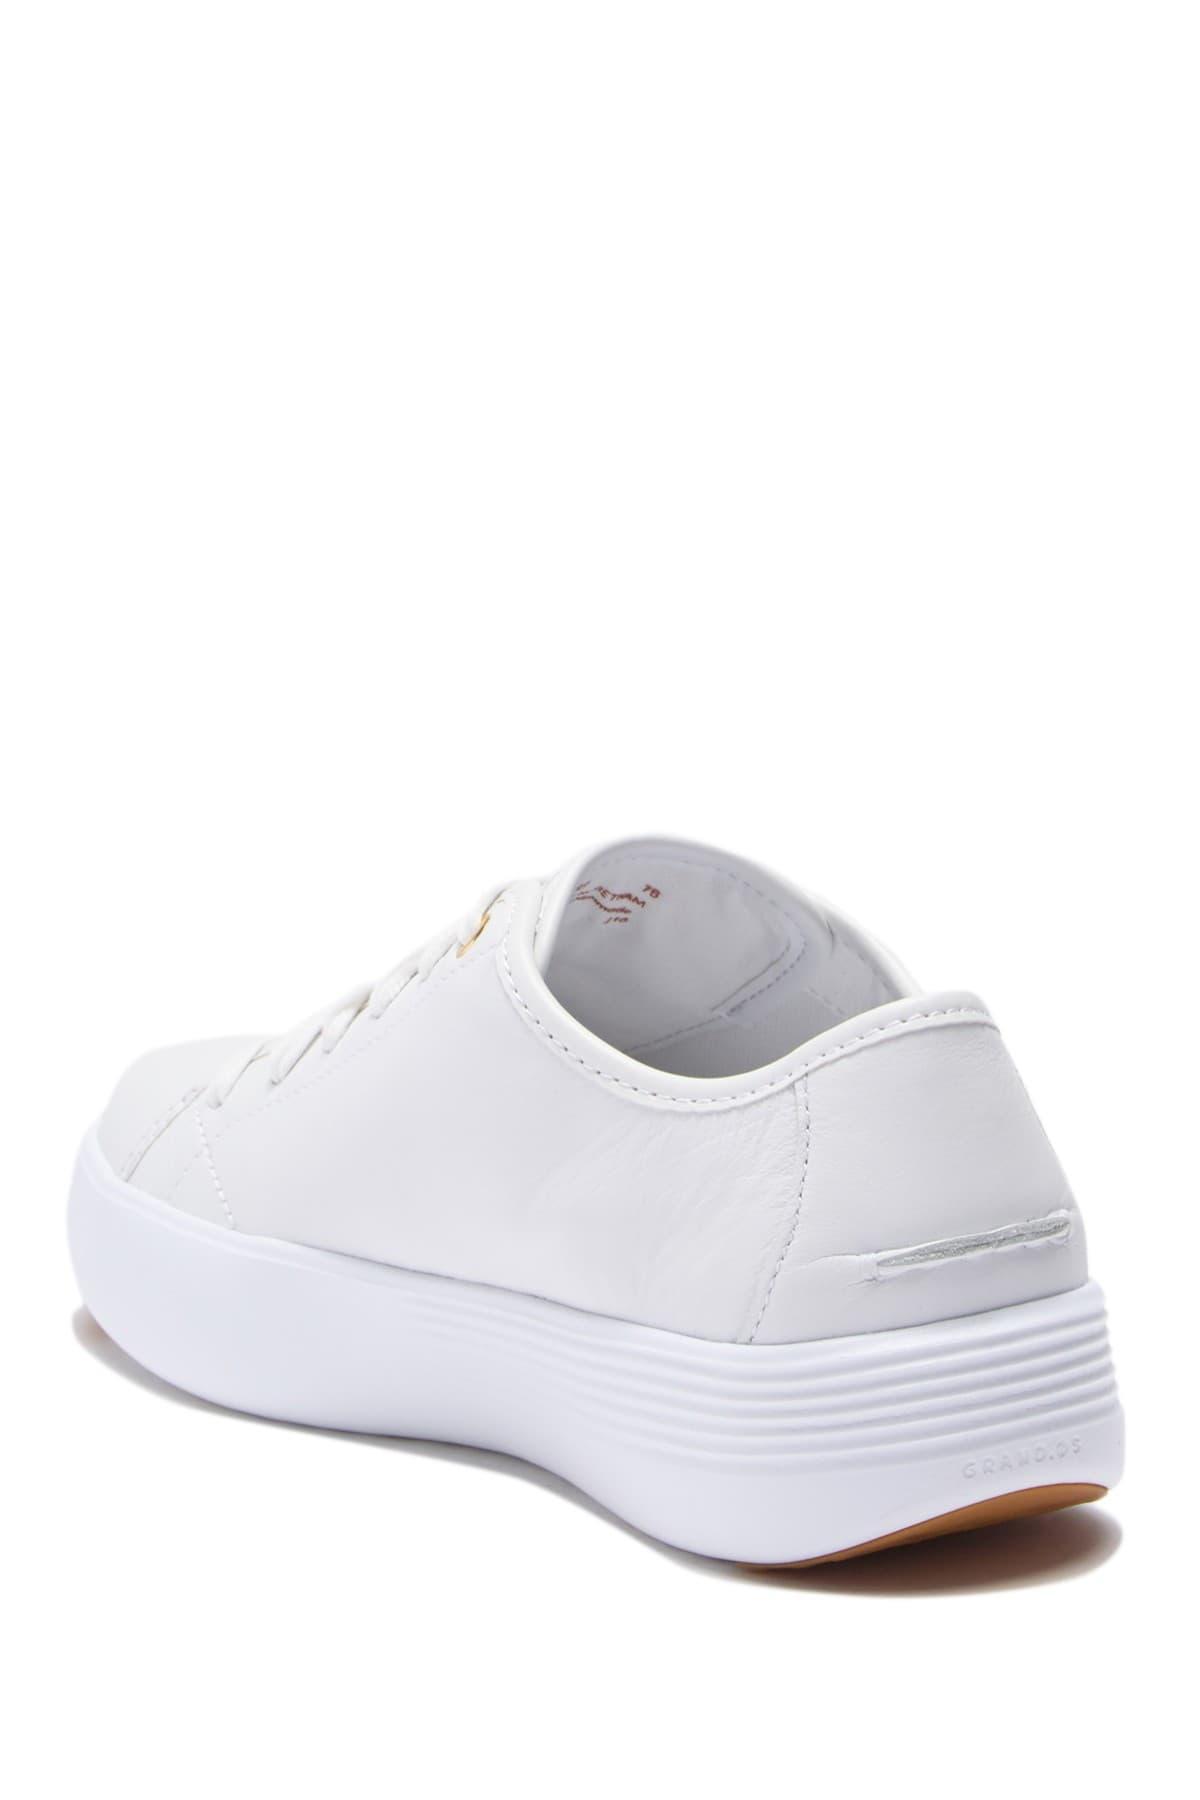 Cole Haan Grand Court Leather Platform Sneaker in White | Lyst